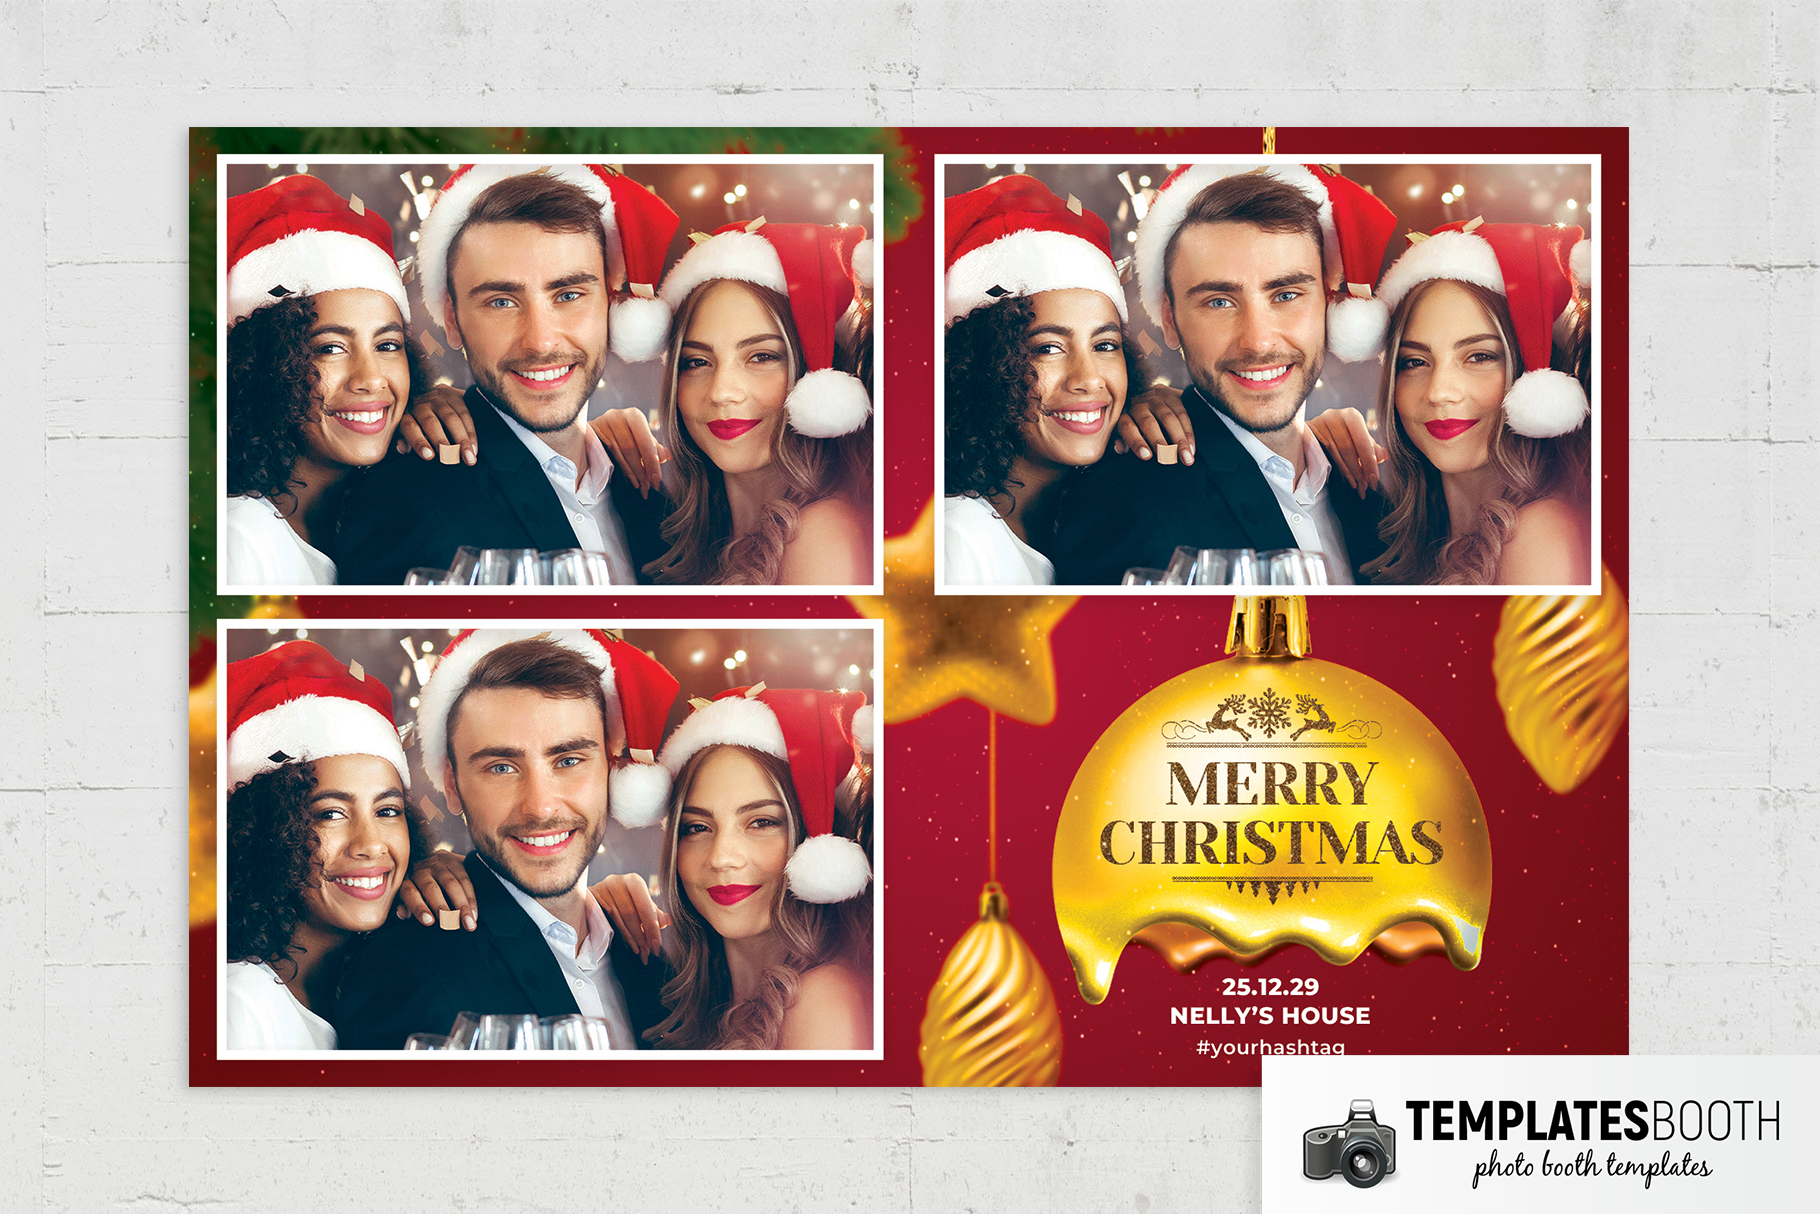 Christmas Bauble Photo Booth Template